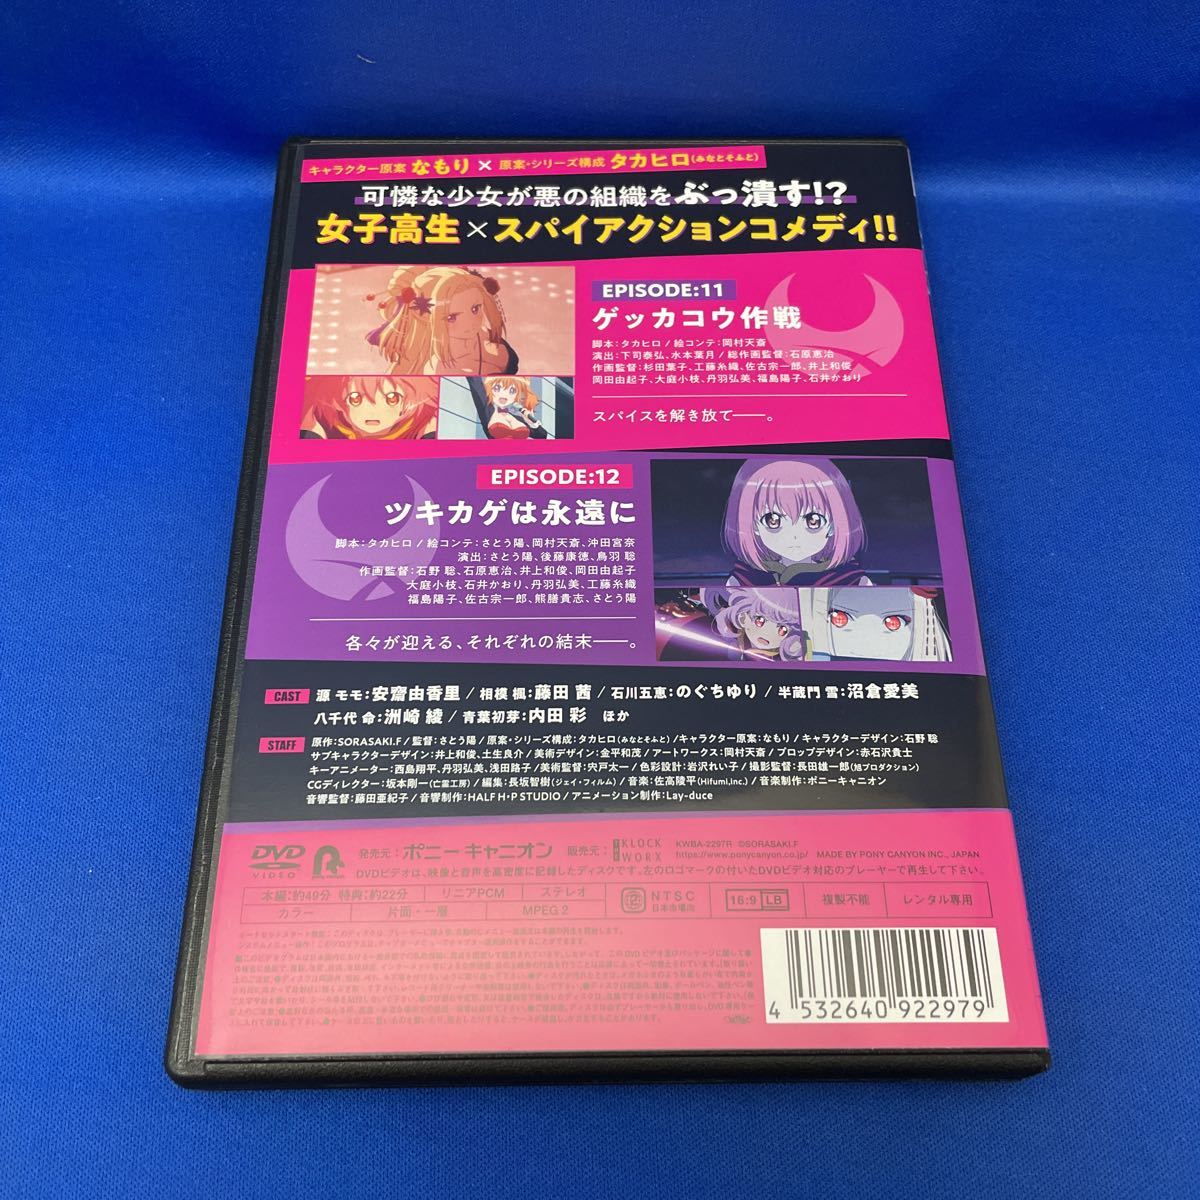 [DVD] Release The spice RELEASE THE SPYCE 1-6 volume all volume set anime rental / cheap .... wistaria rice field .. .... marsh hing . love beautiful . cape .